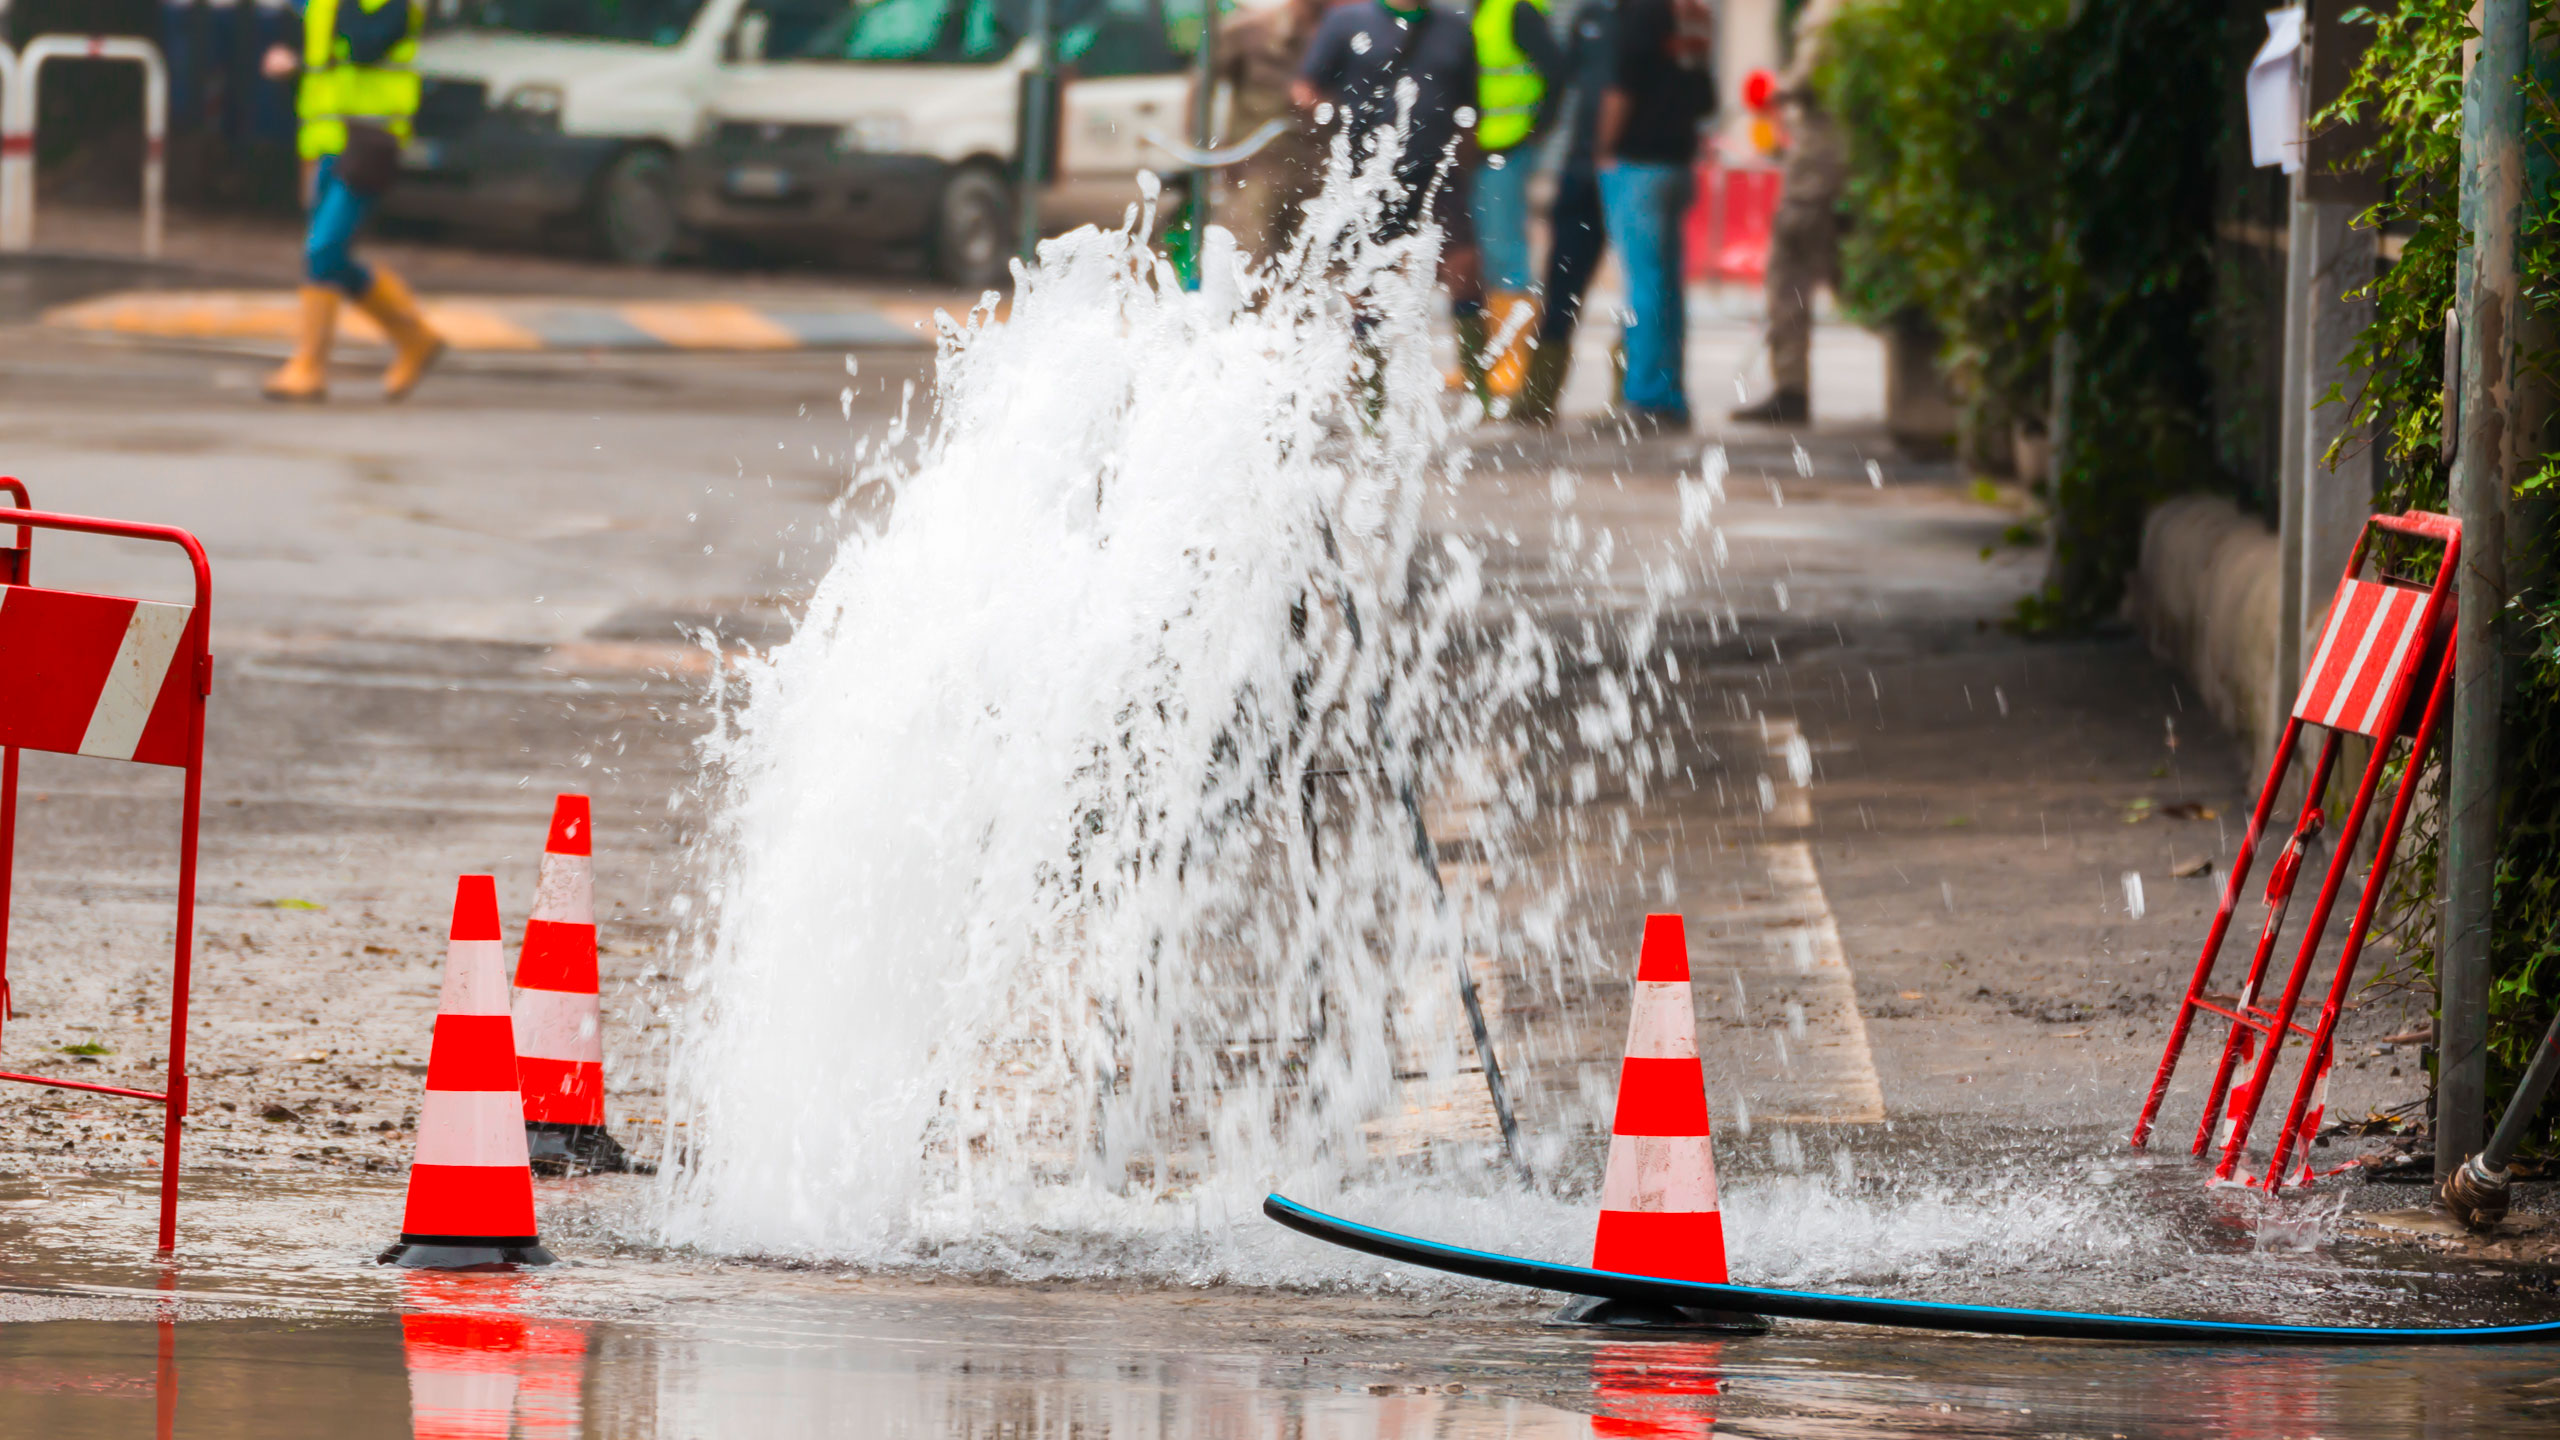 Water leakage in the streets